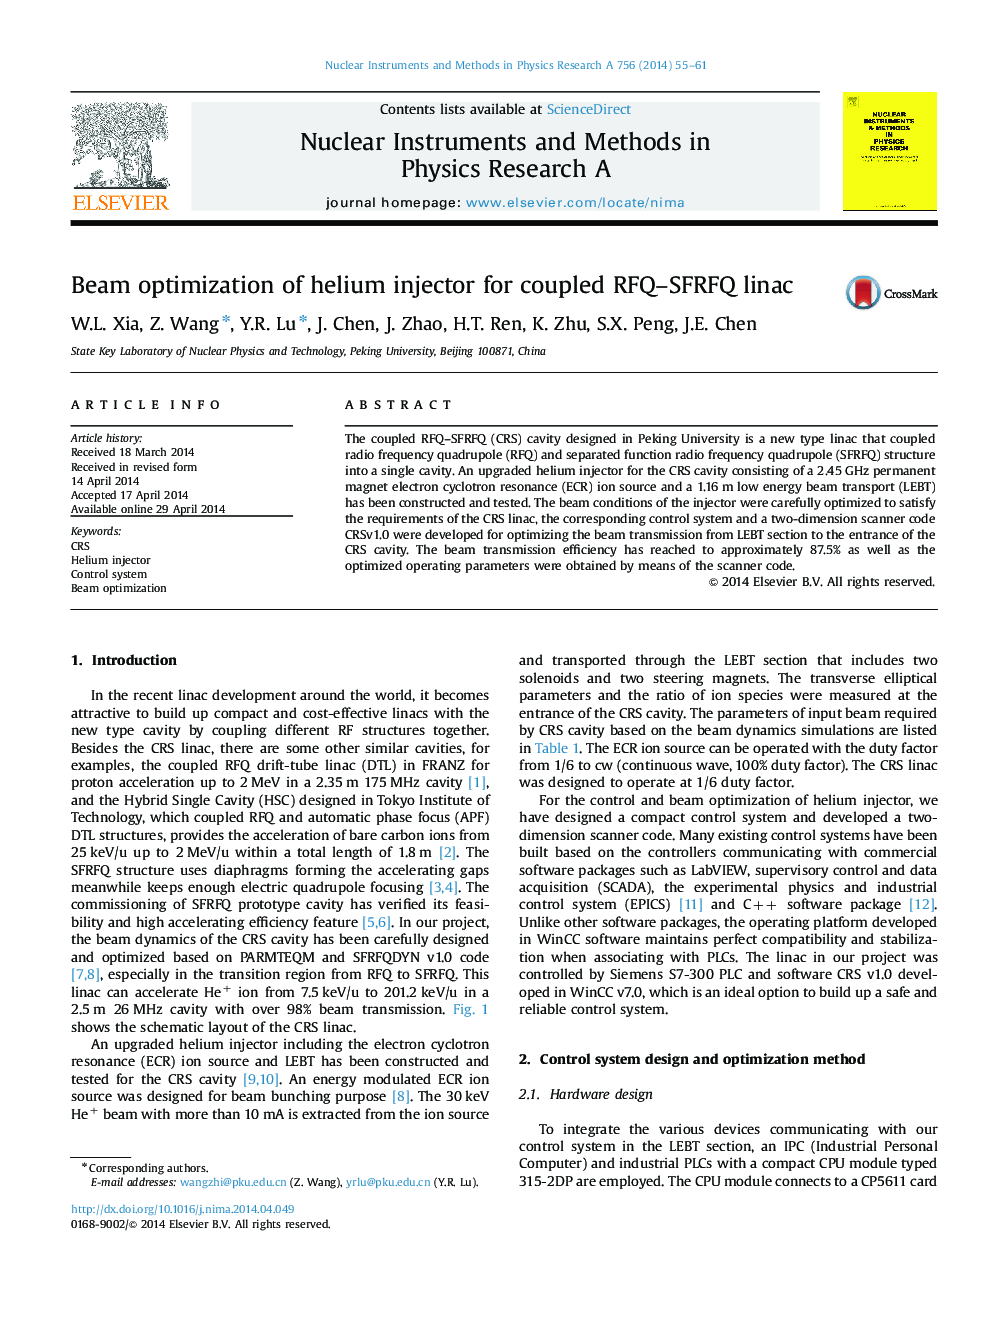 Beam optimization of helium injector for coupled RFQ-SFRFQ linac